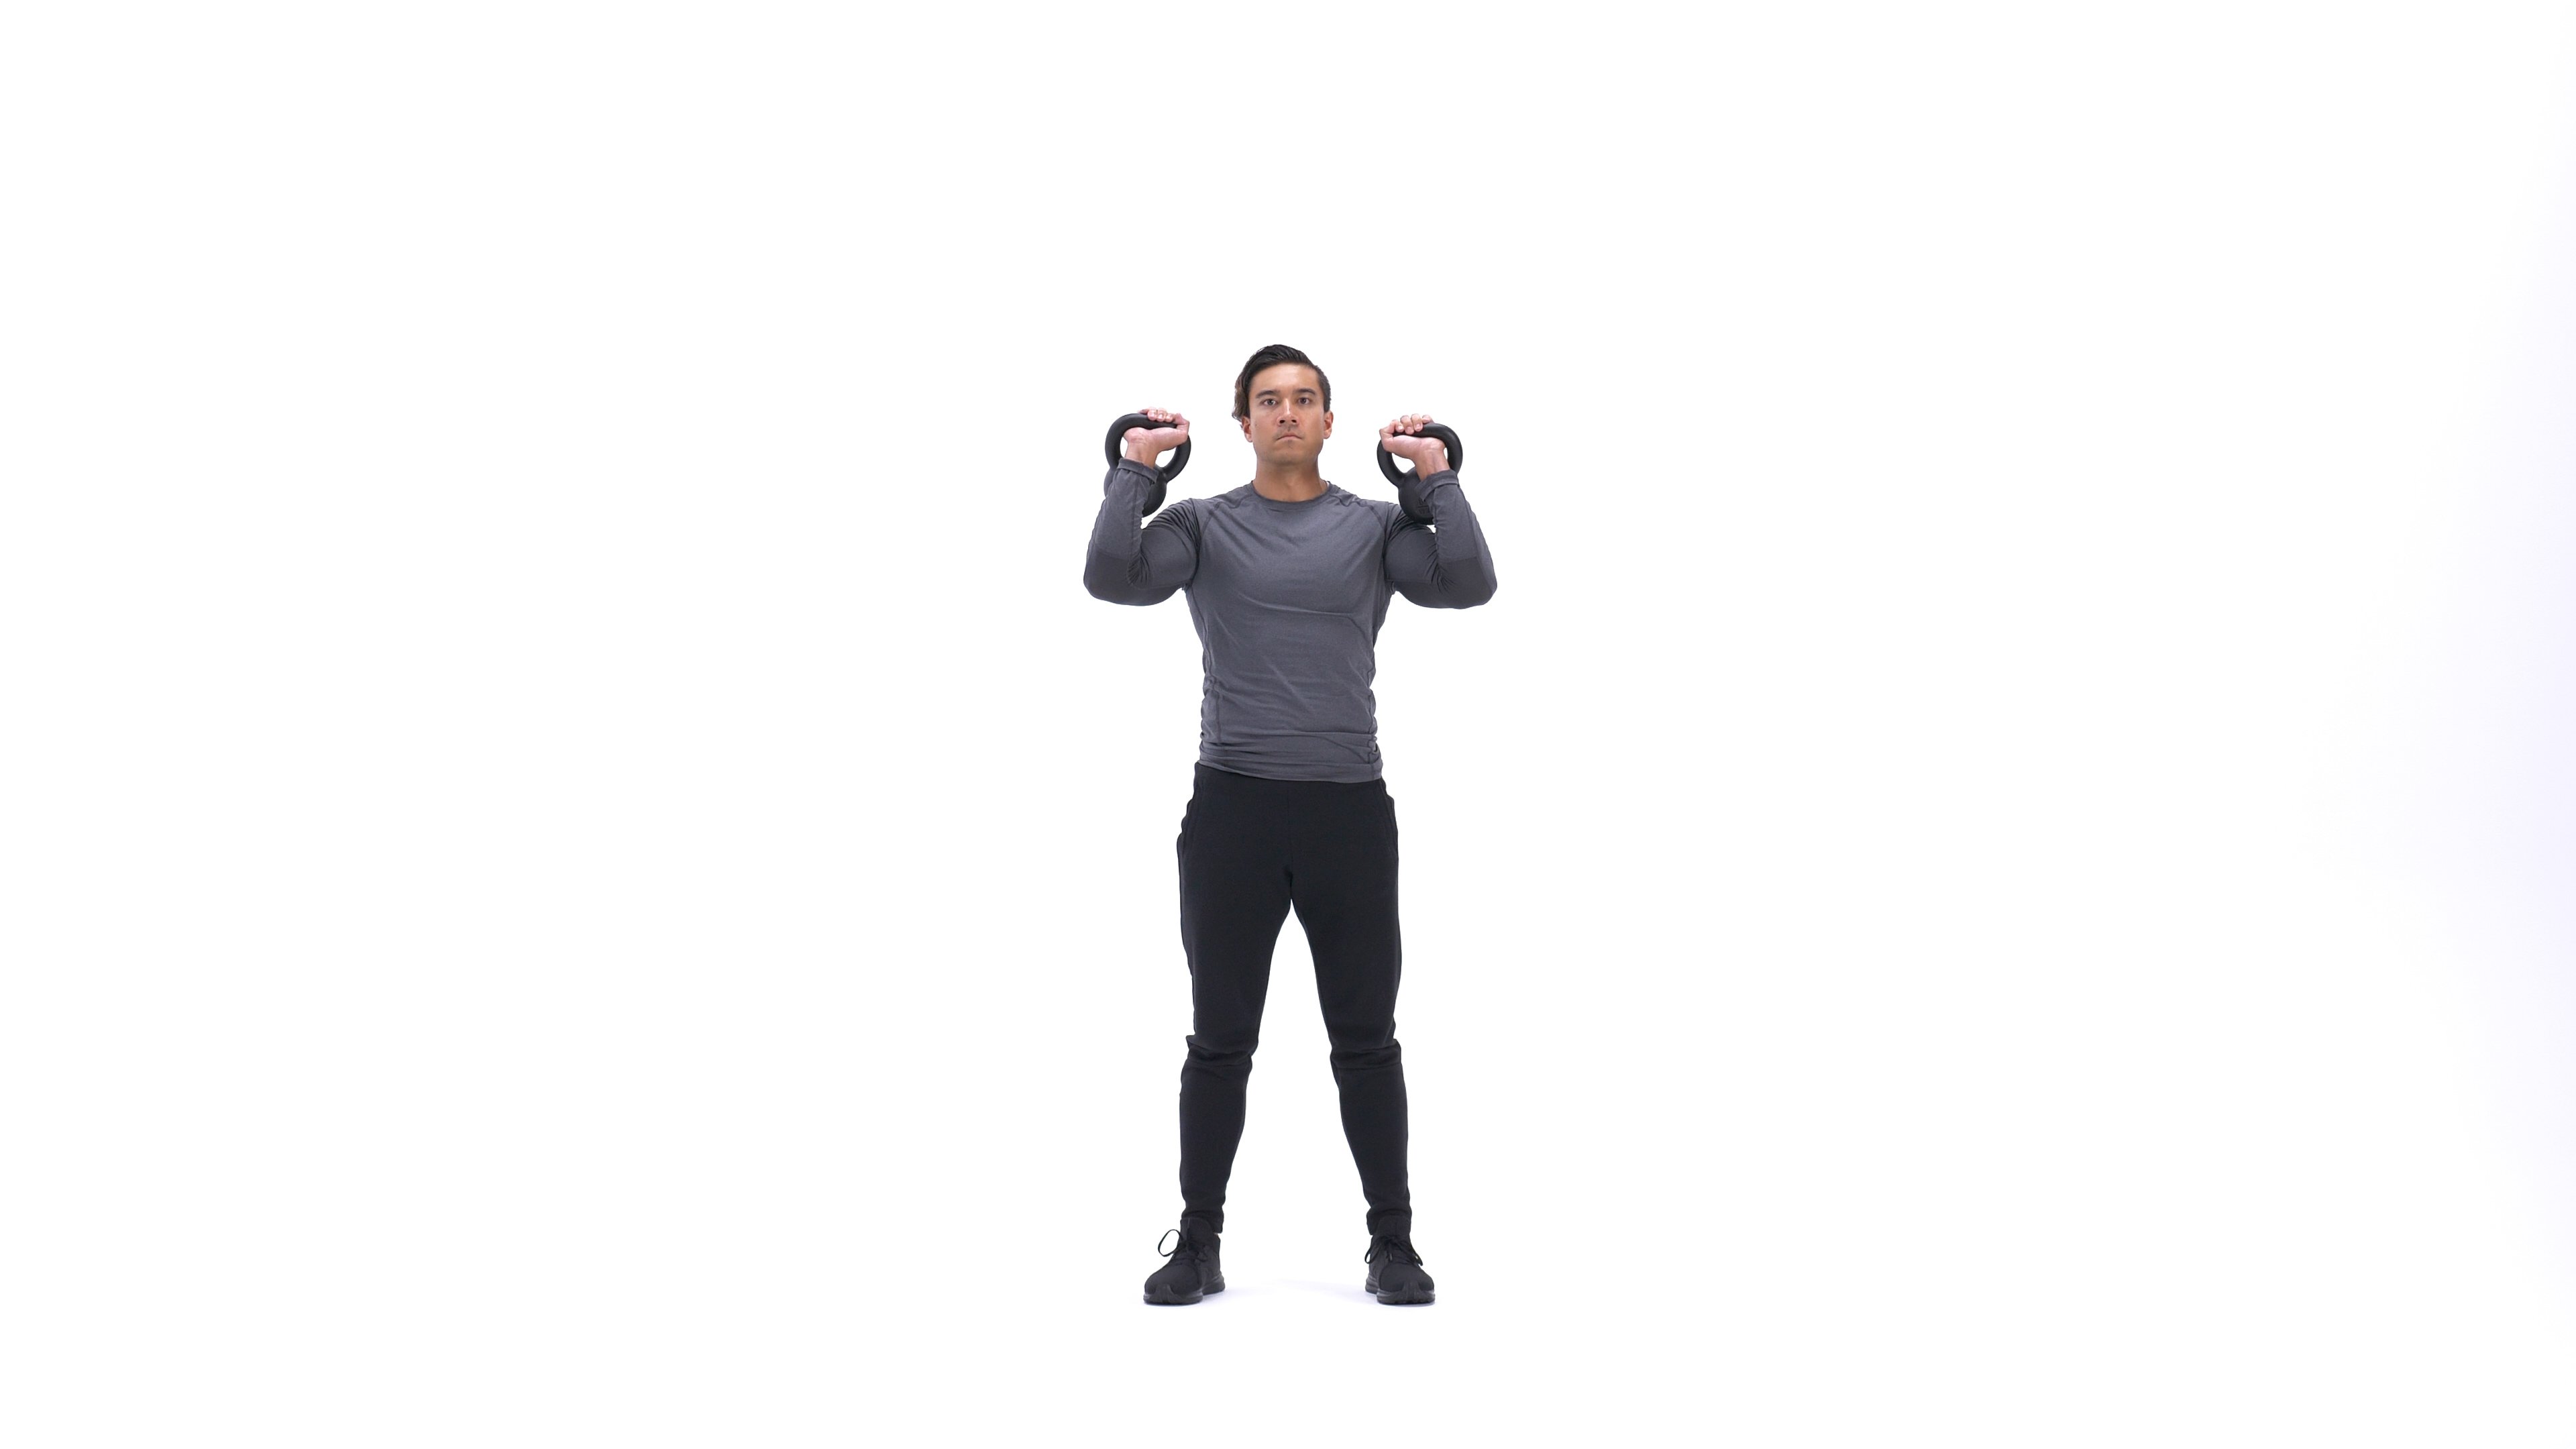 Double Kettlebell Push Press, Exercise Videos & Guides